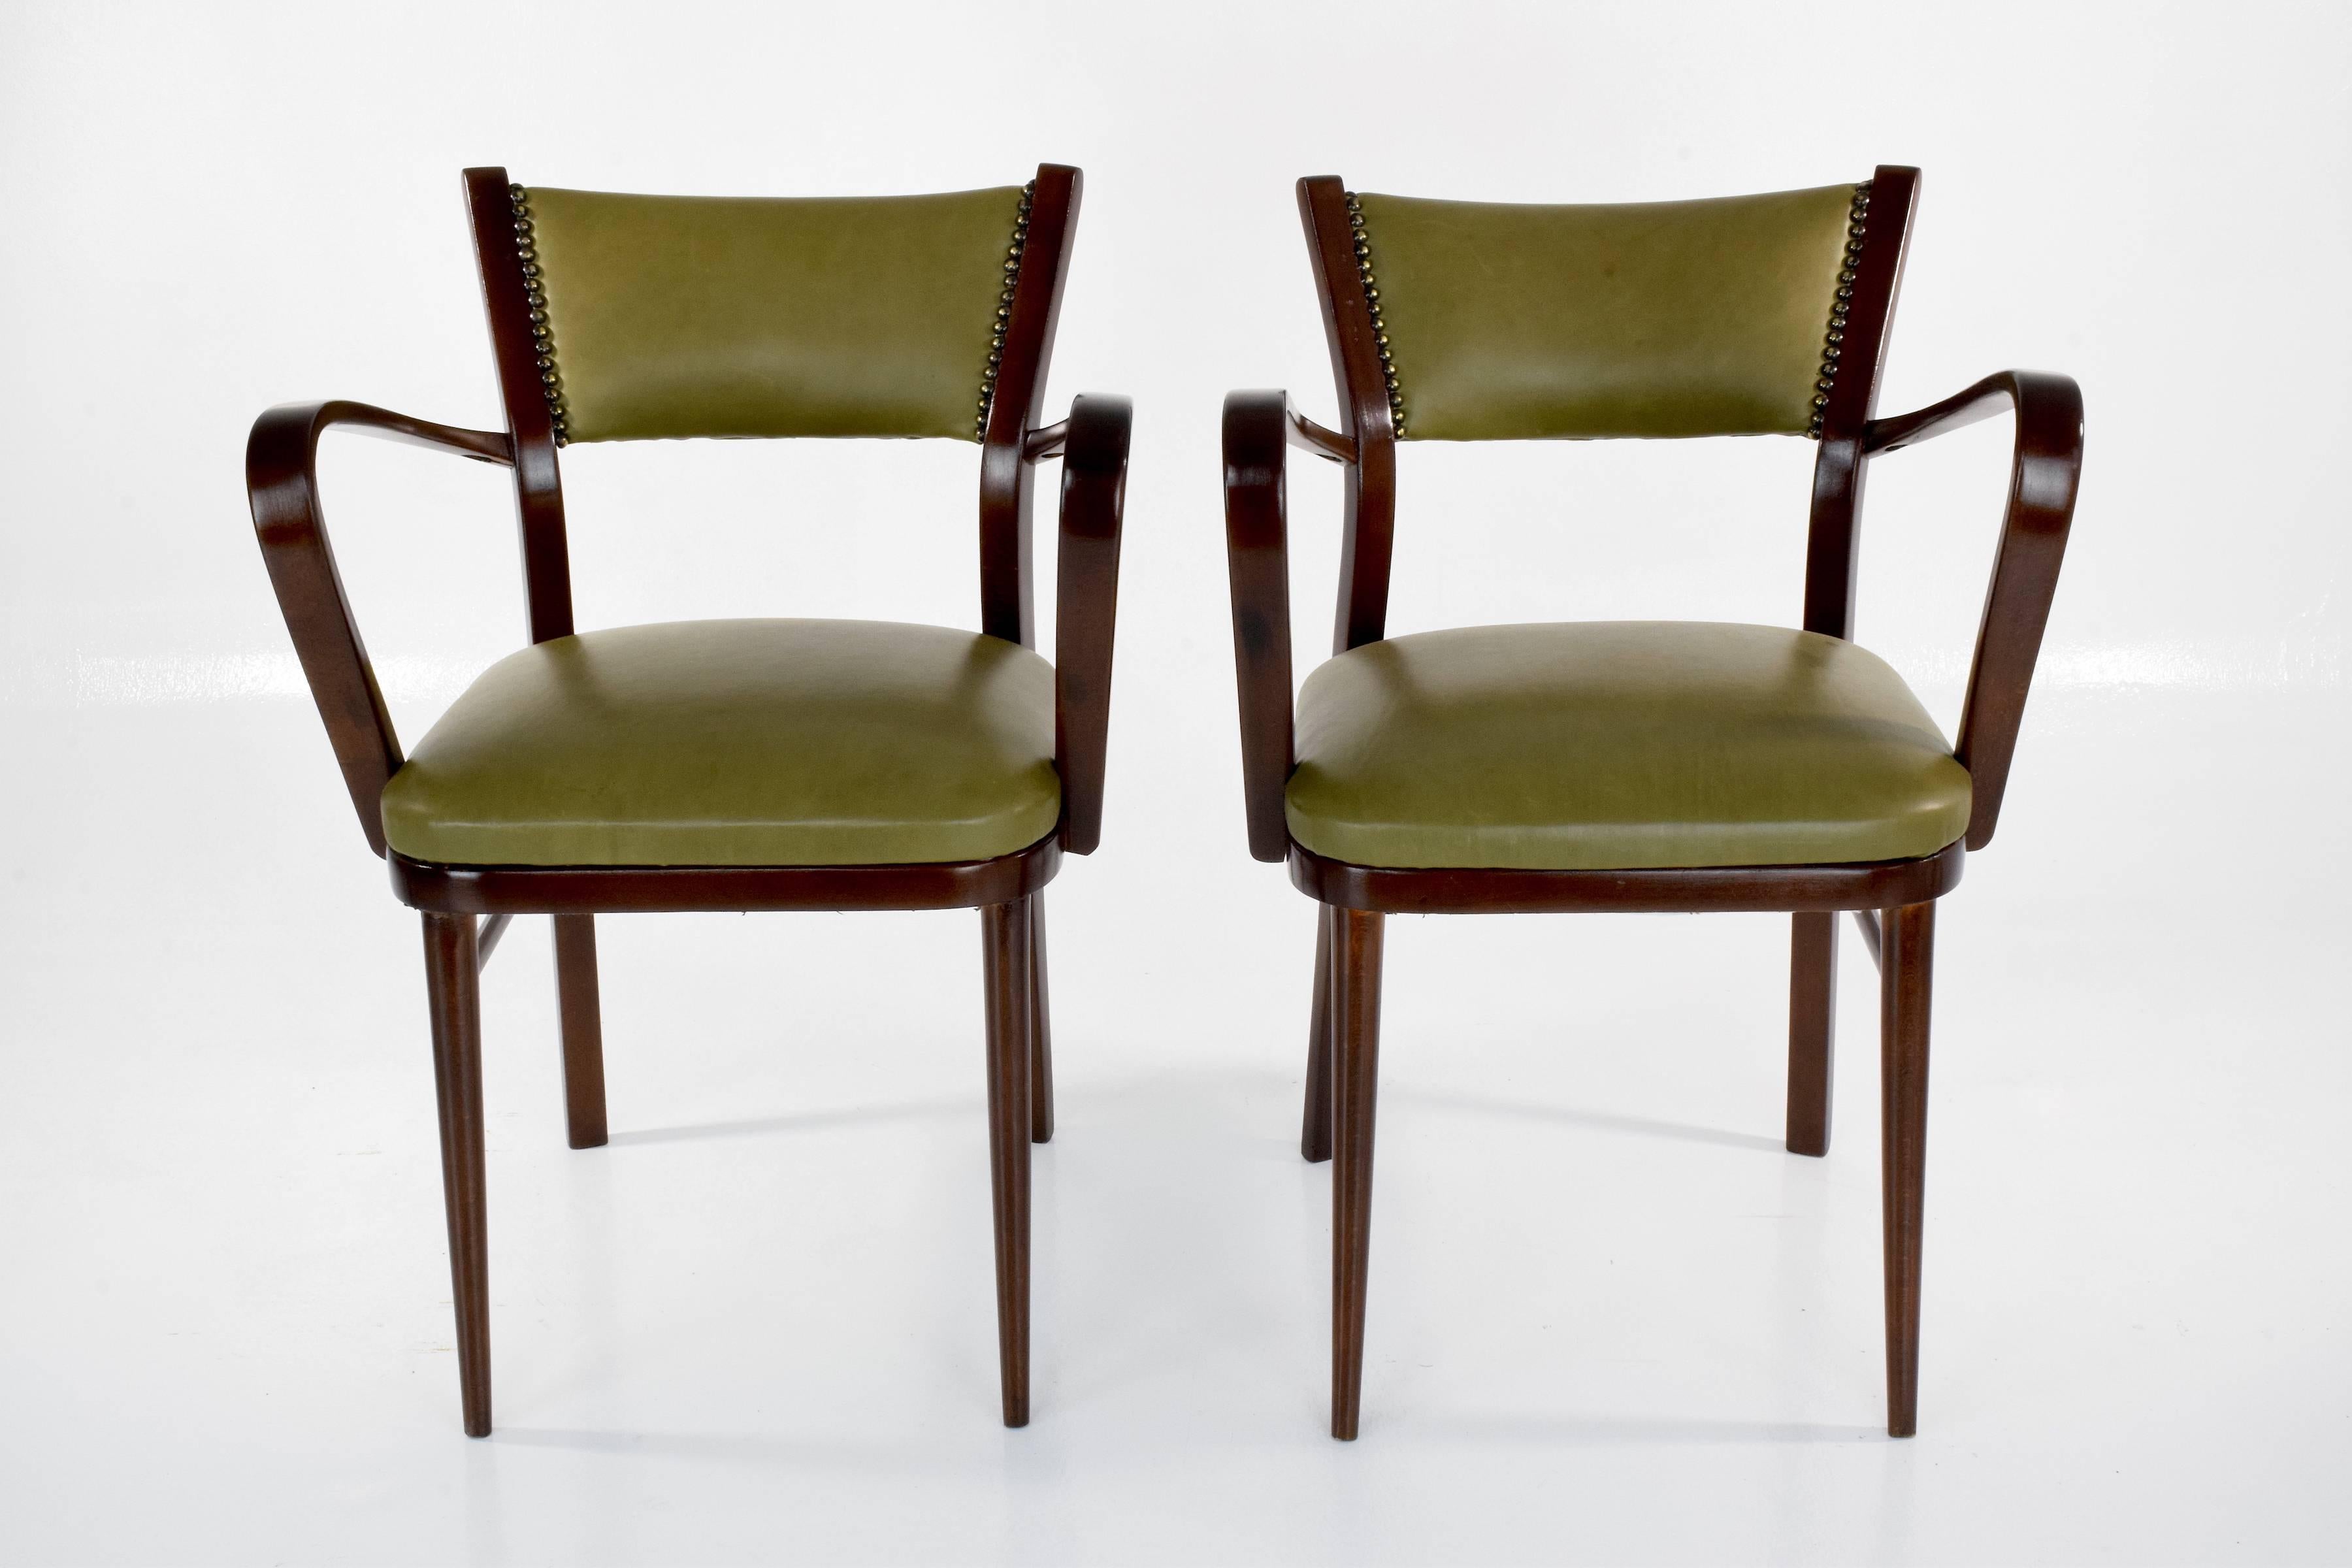 Set of two Italian 20th-century vintage side chairs composed of stained bent beechwood with elaborately curved arms with side stretchers and beautiful splayed tapered legs. 
Restored, varnished and re-upholstered with Italian green leather and